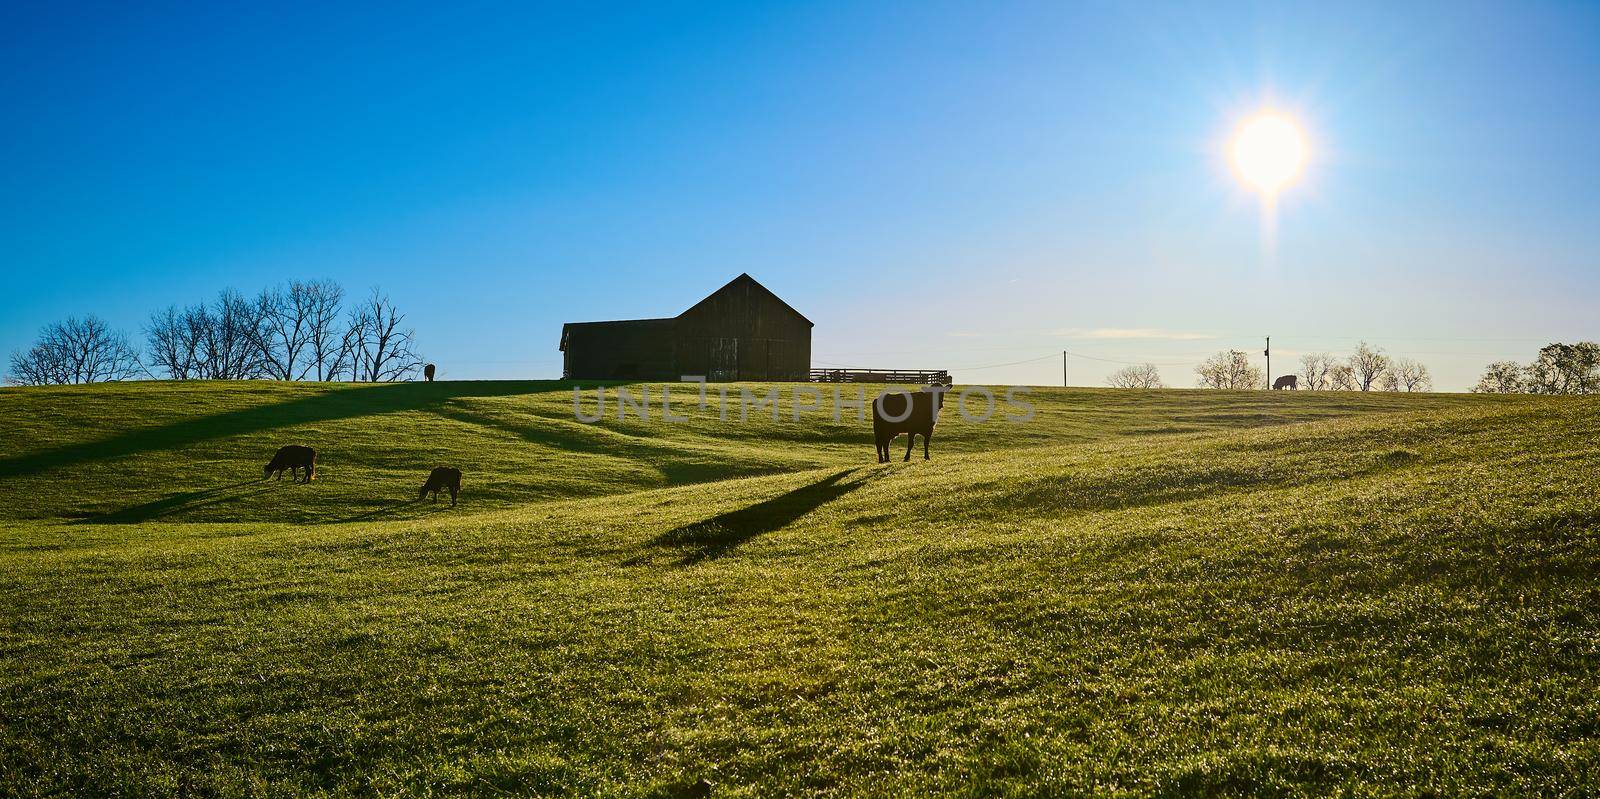 Cows grazing in a pasture with the early morning sun.